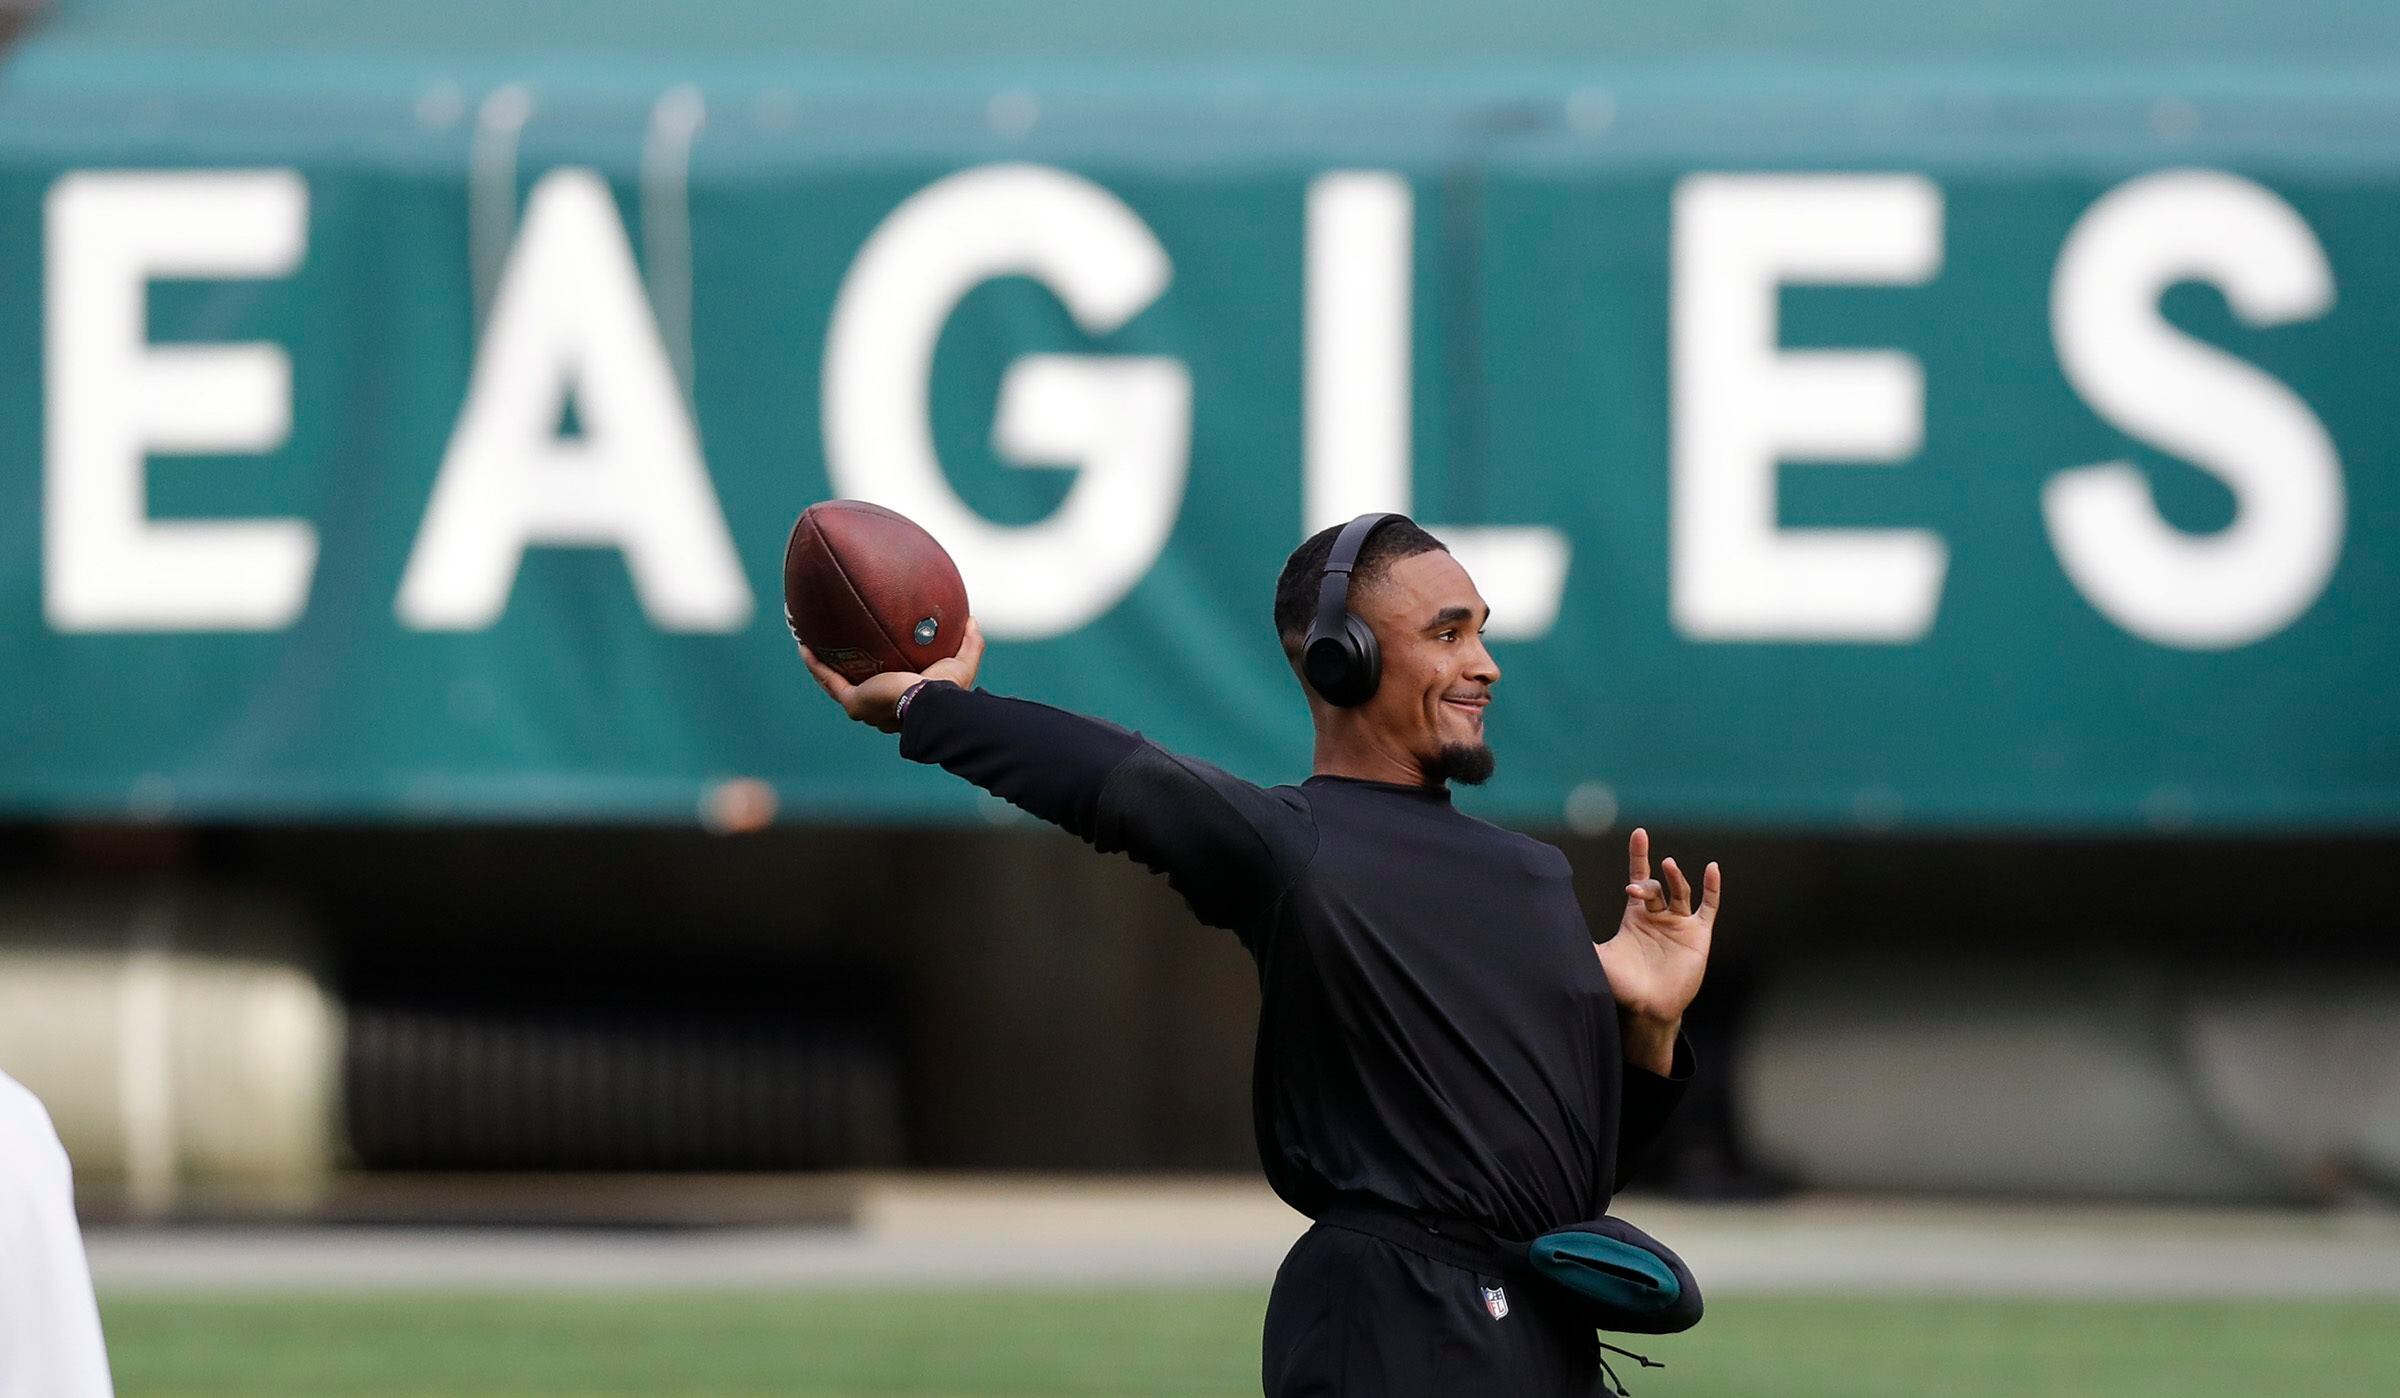 2021 Eagles schedule: Our beat writers analyze the season